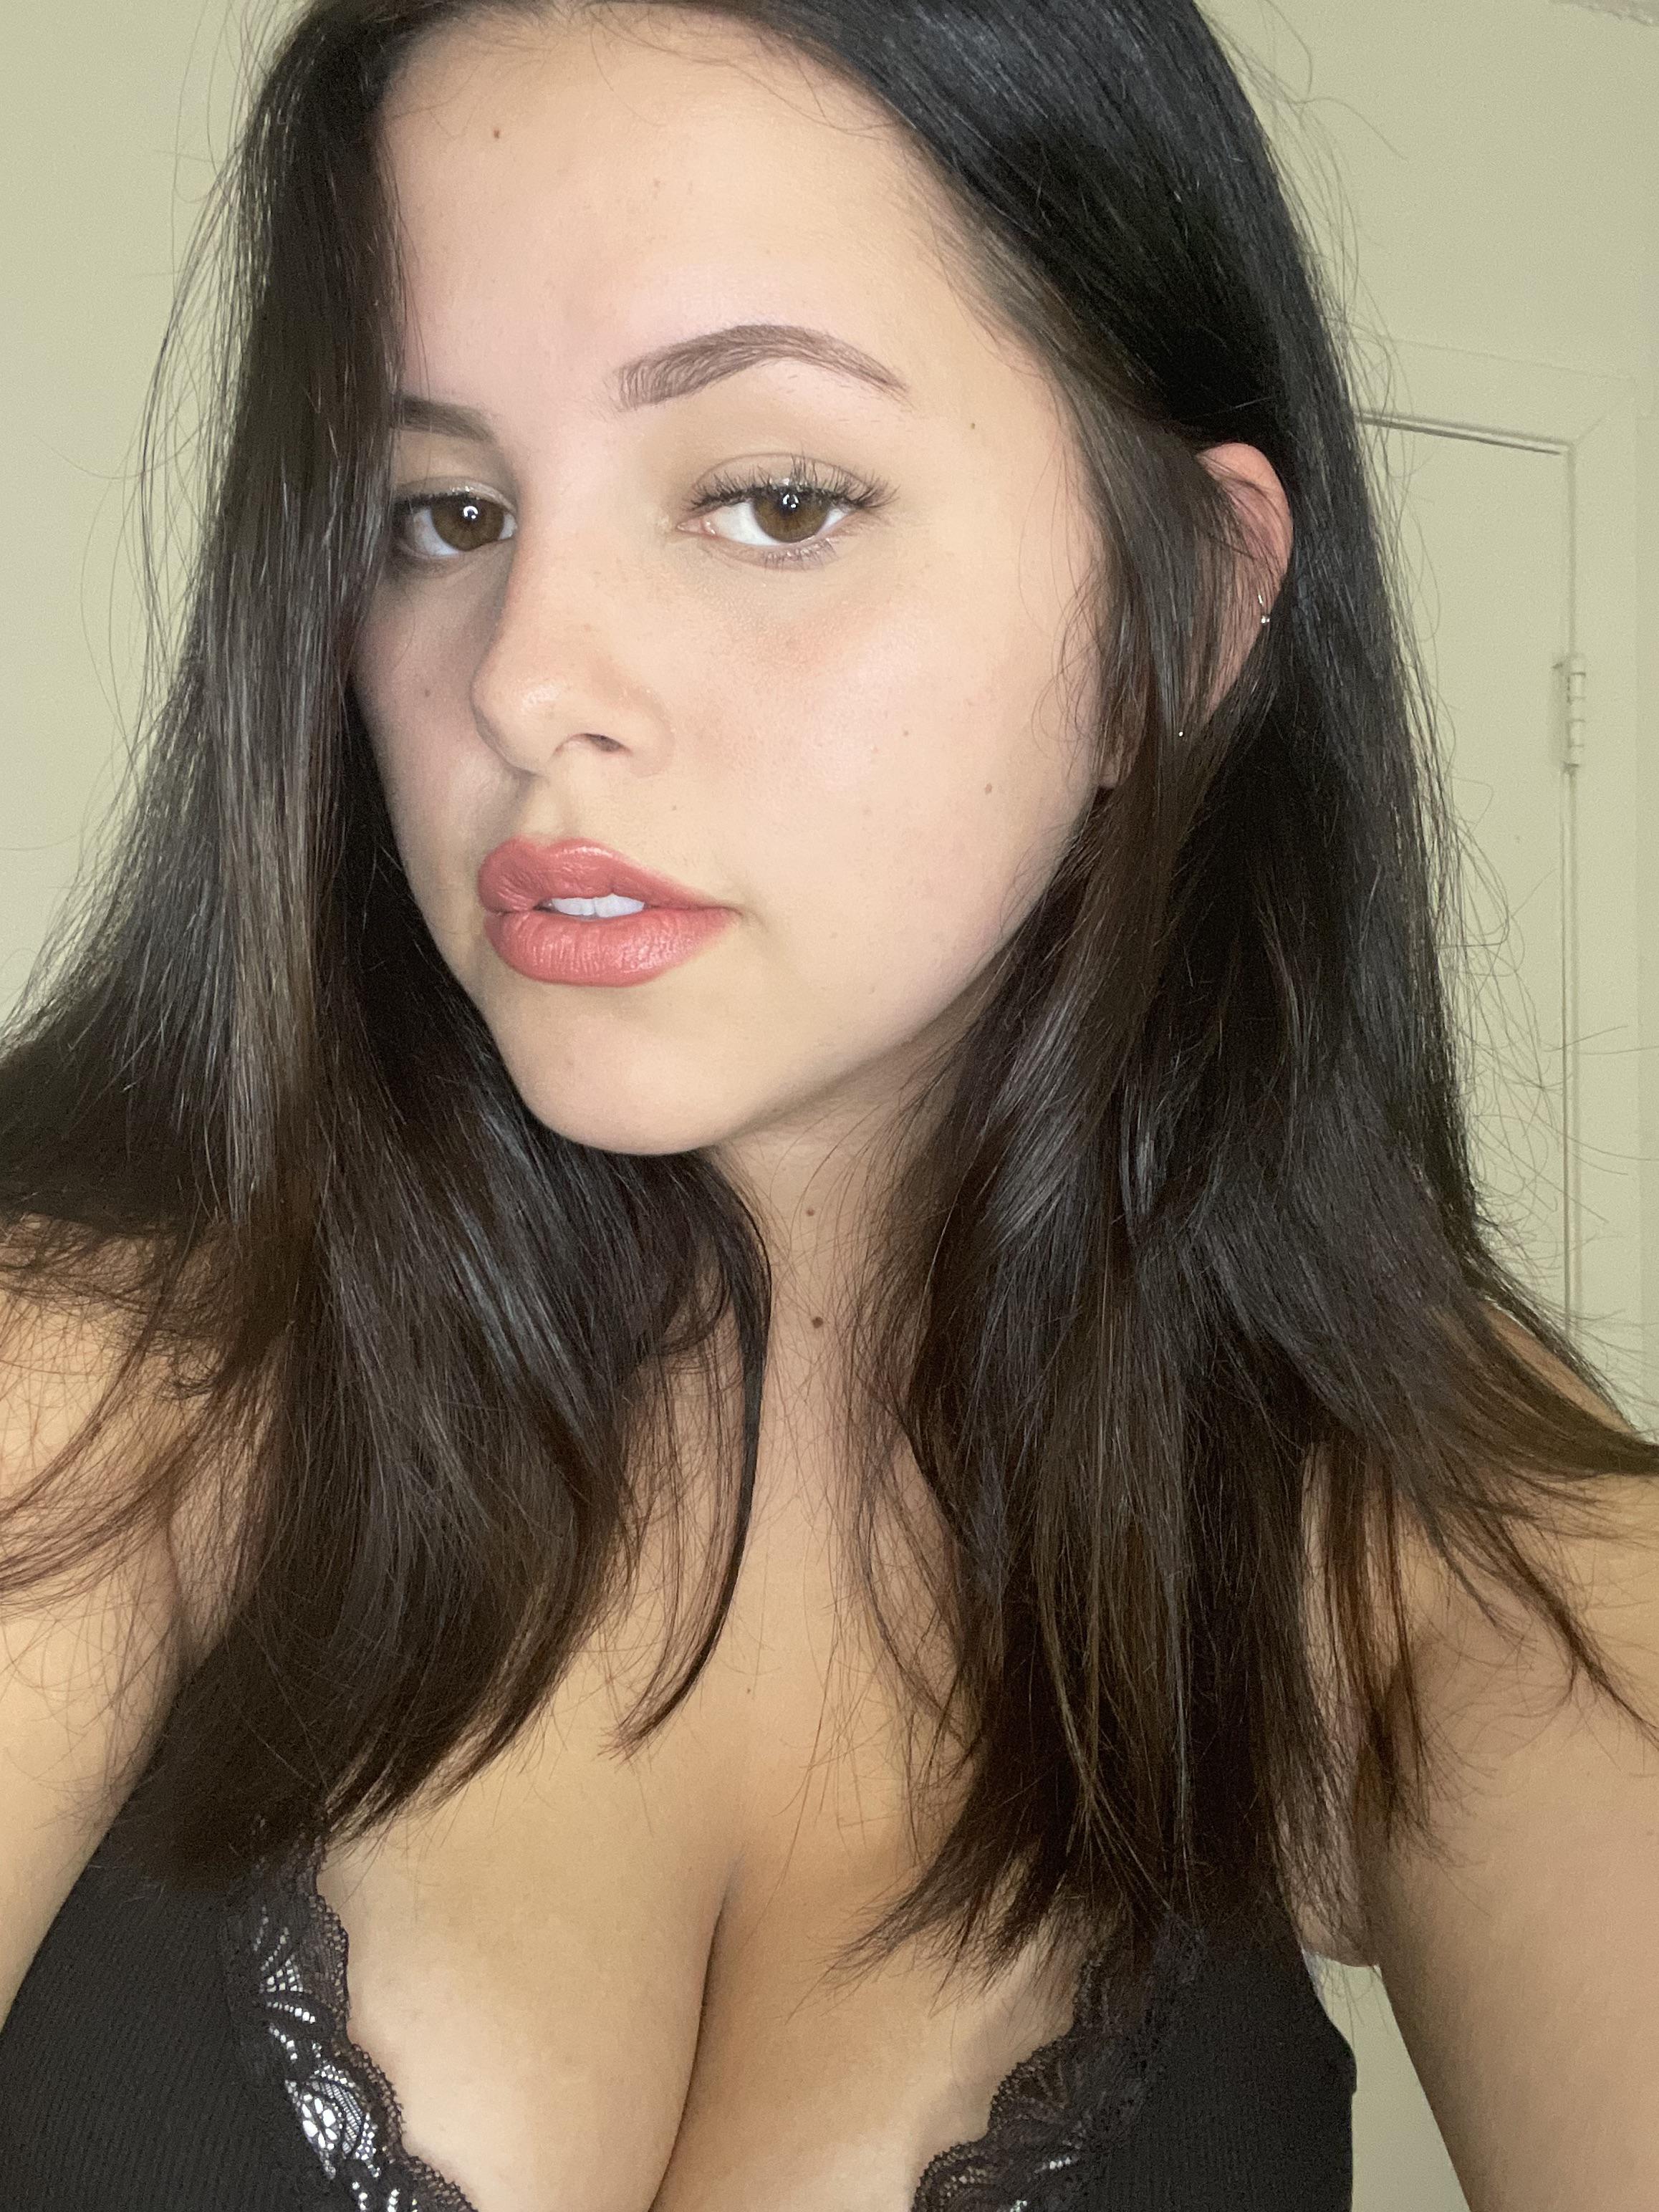 Does my cleavage fit in here?? f18